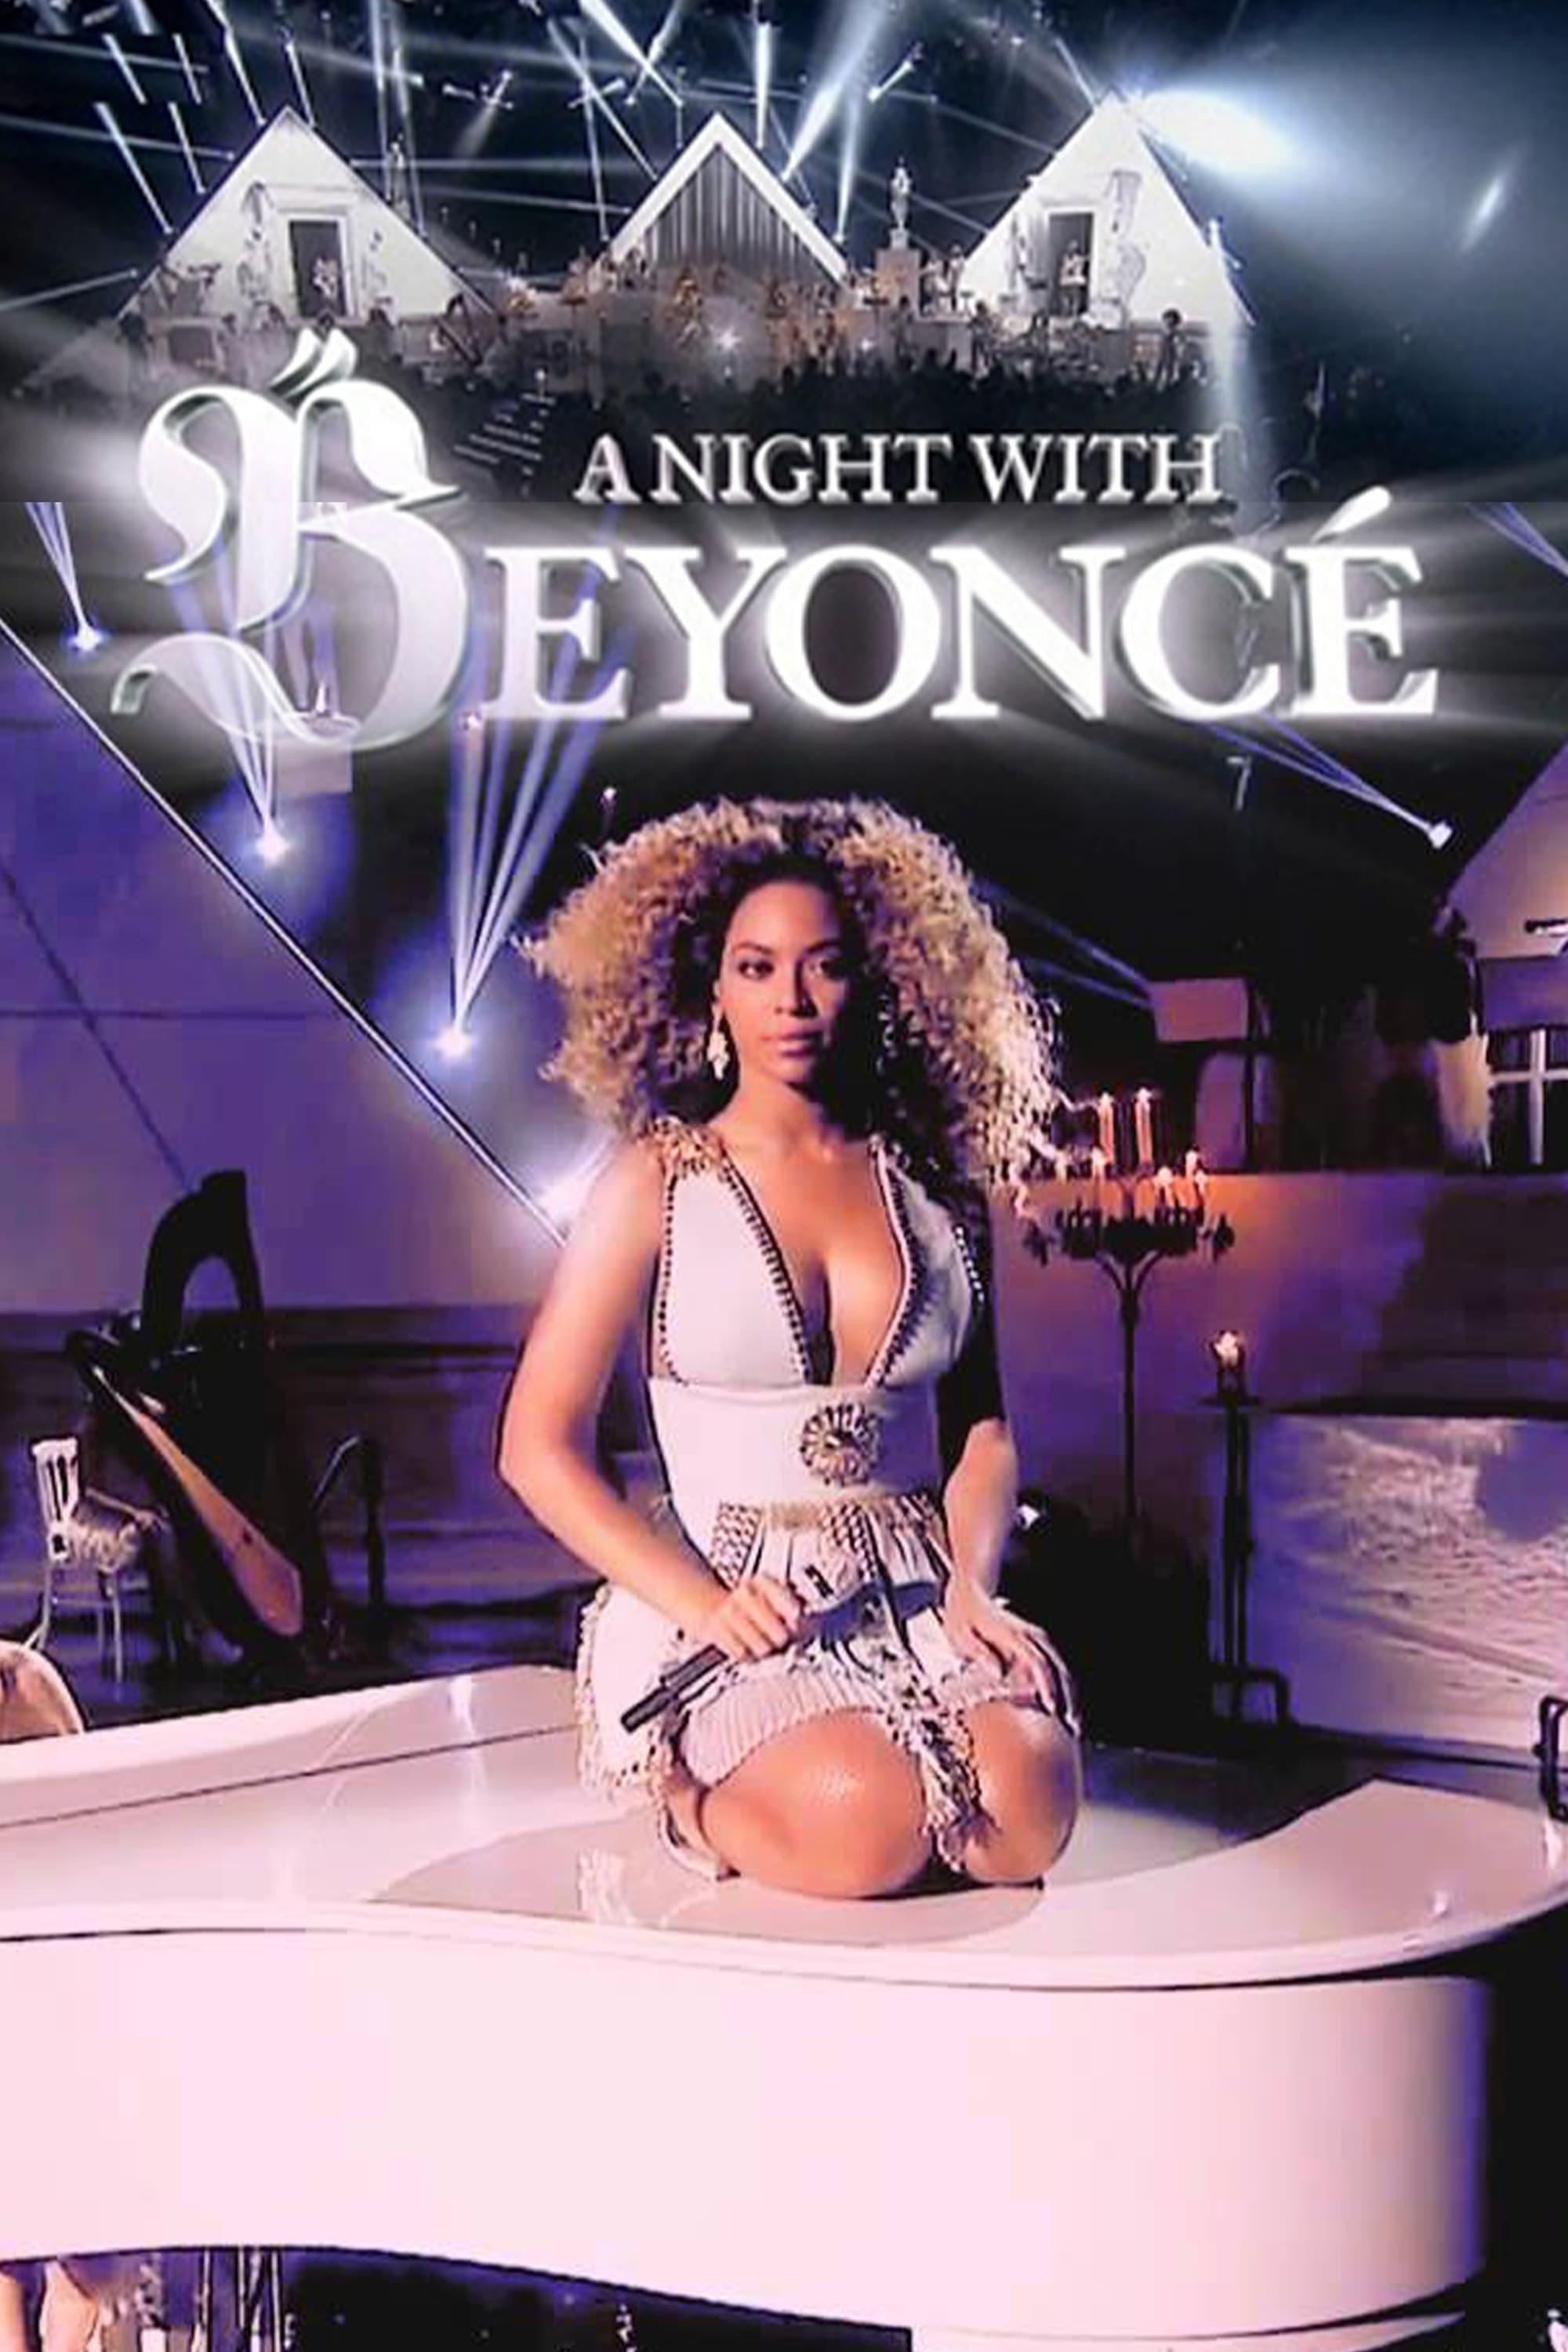 A Night with Beyonce poster